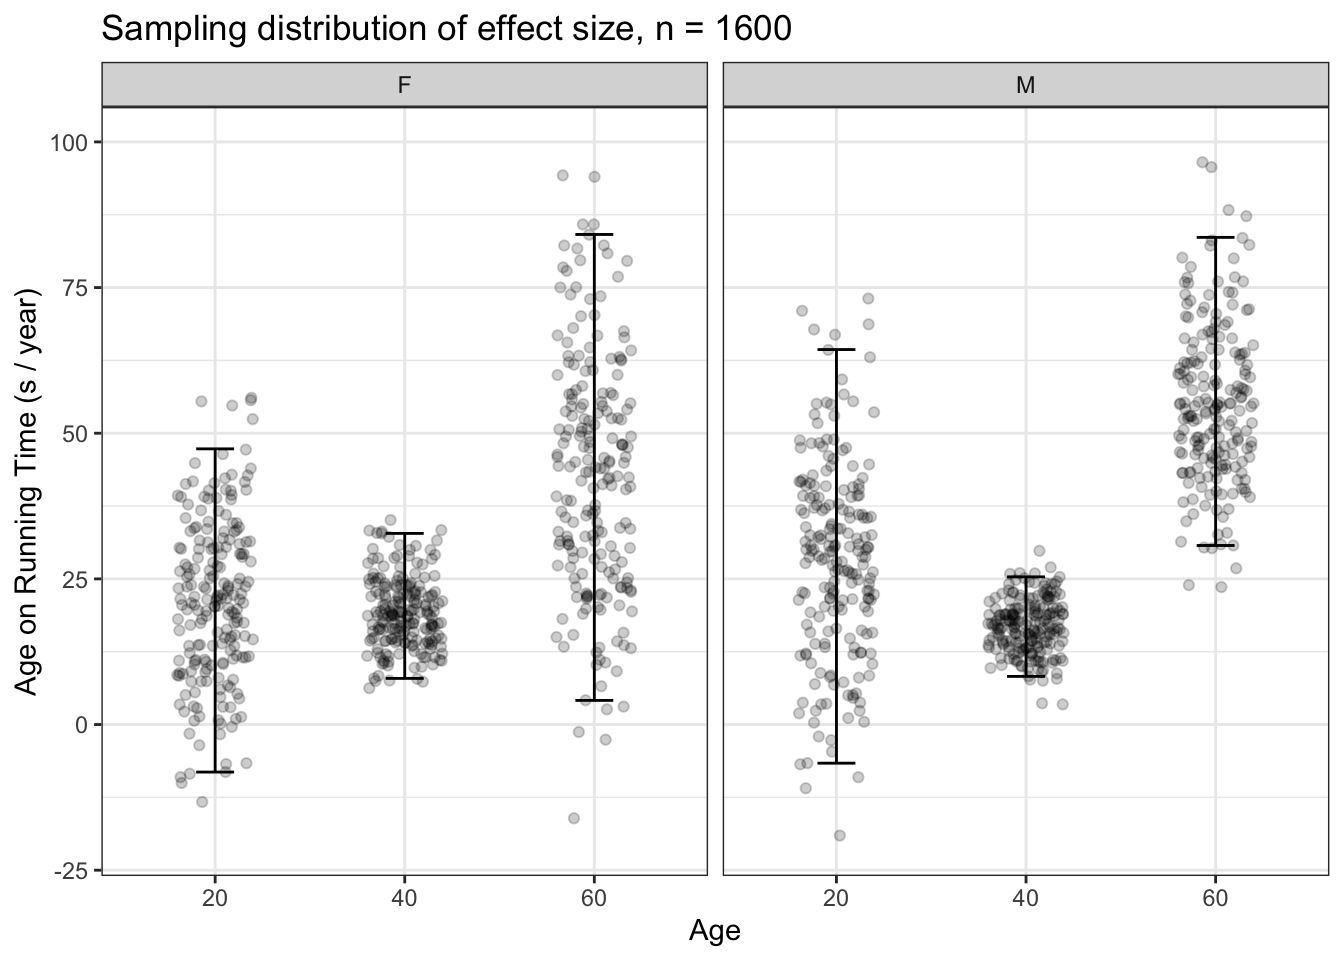 200 sampling trials with n = 1600 comparing the effect size of age on running time at ages 20, 40, and 60 years. The differences in effect size for men at age 40 and 60 are evident: the confidence intervals do not overlap.